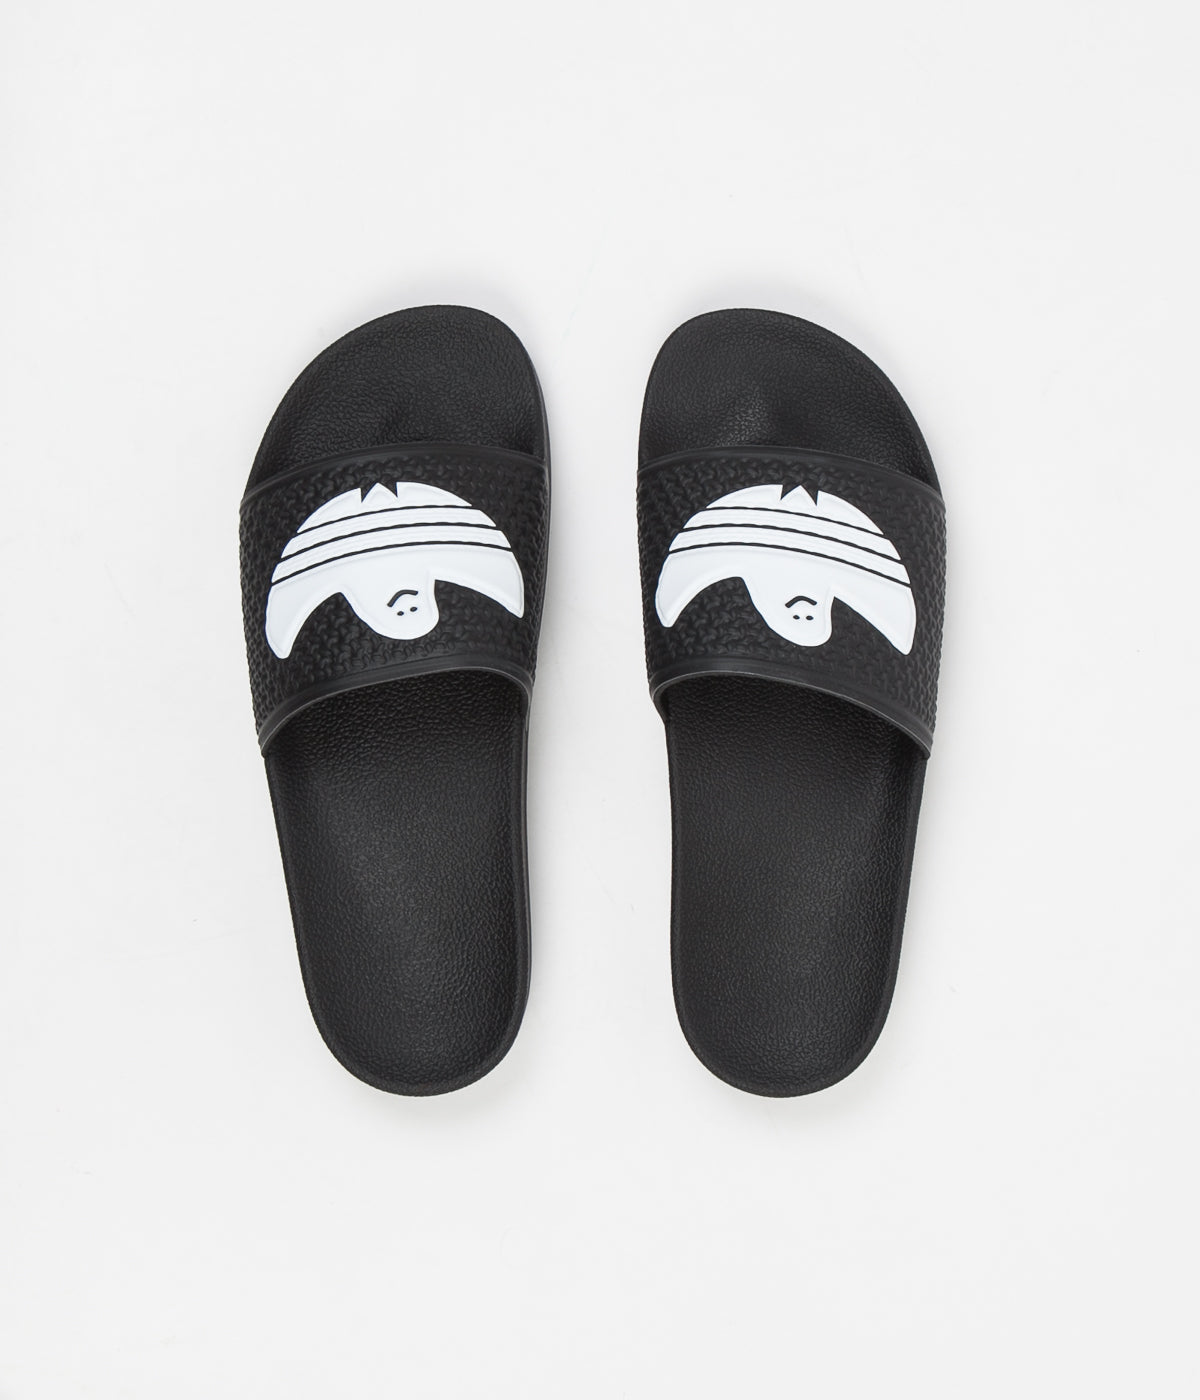 adidas iniki boost canada shoes store hours - AlwancolorShops - Adidas Shmoofoil Slides | yeezy inspired leggings plus size and boots